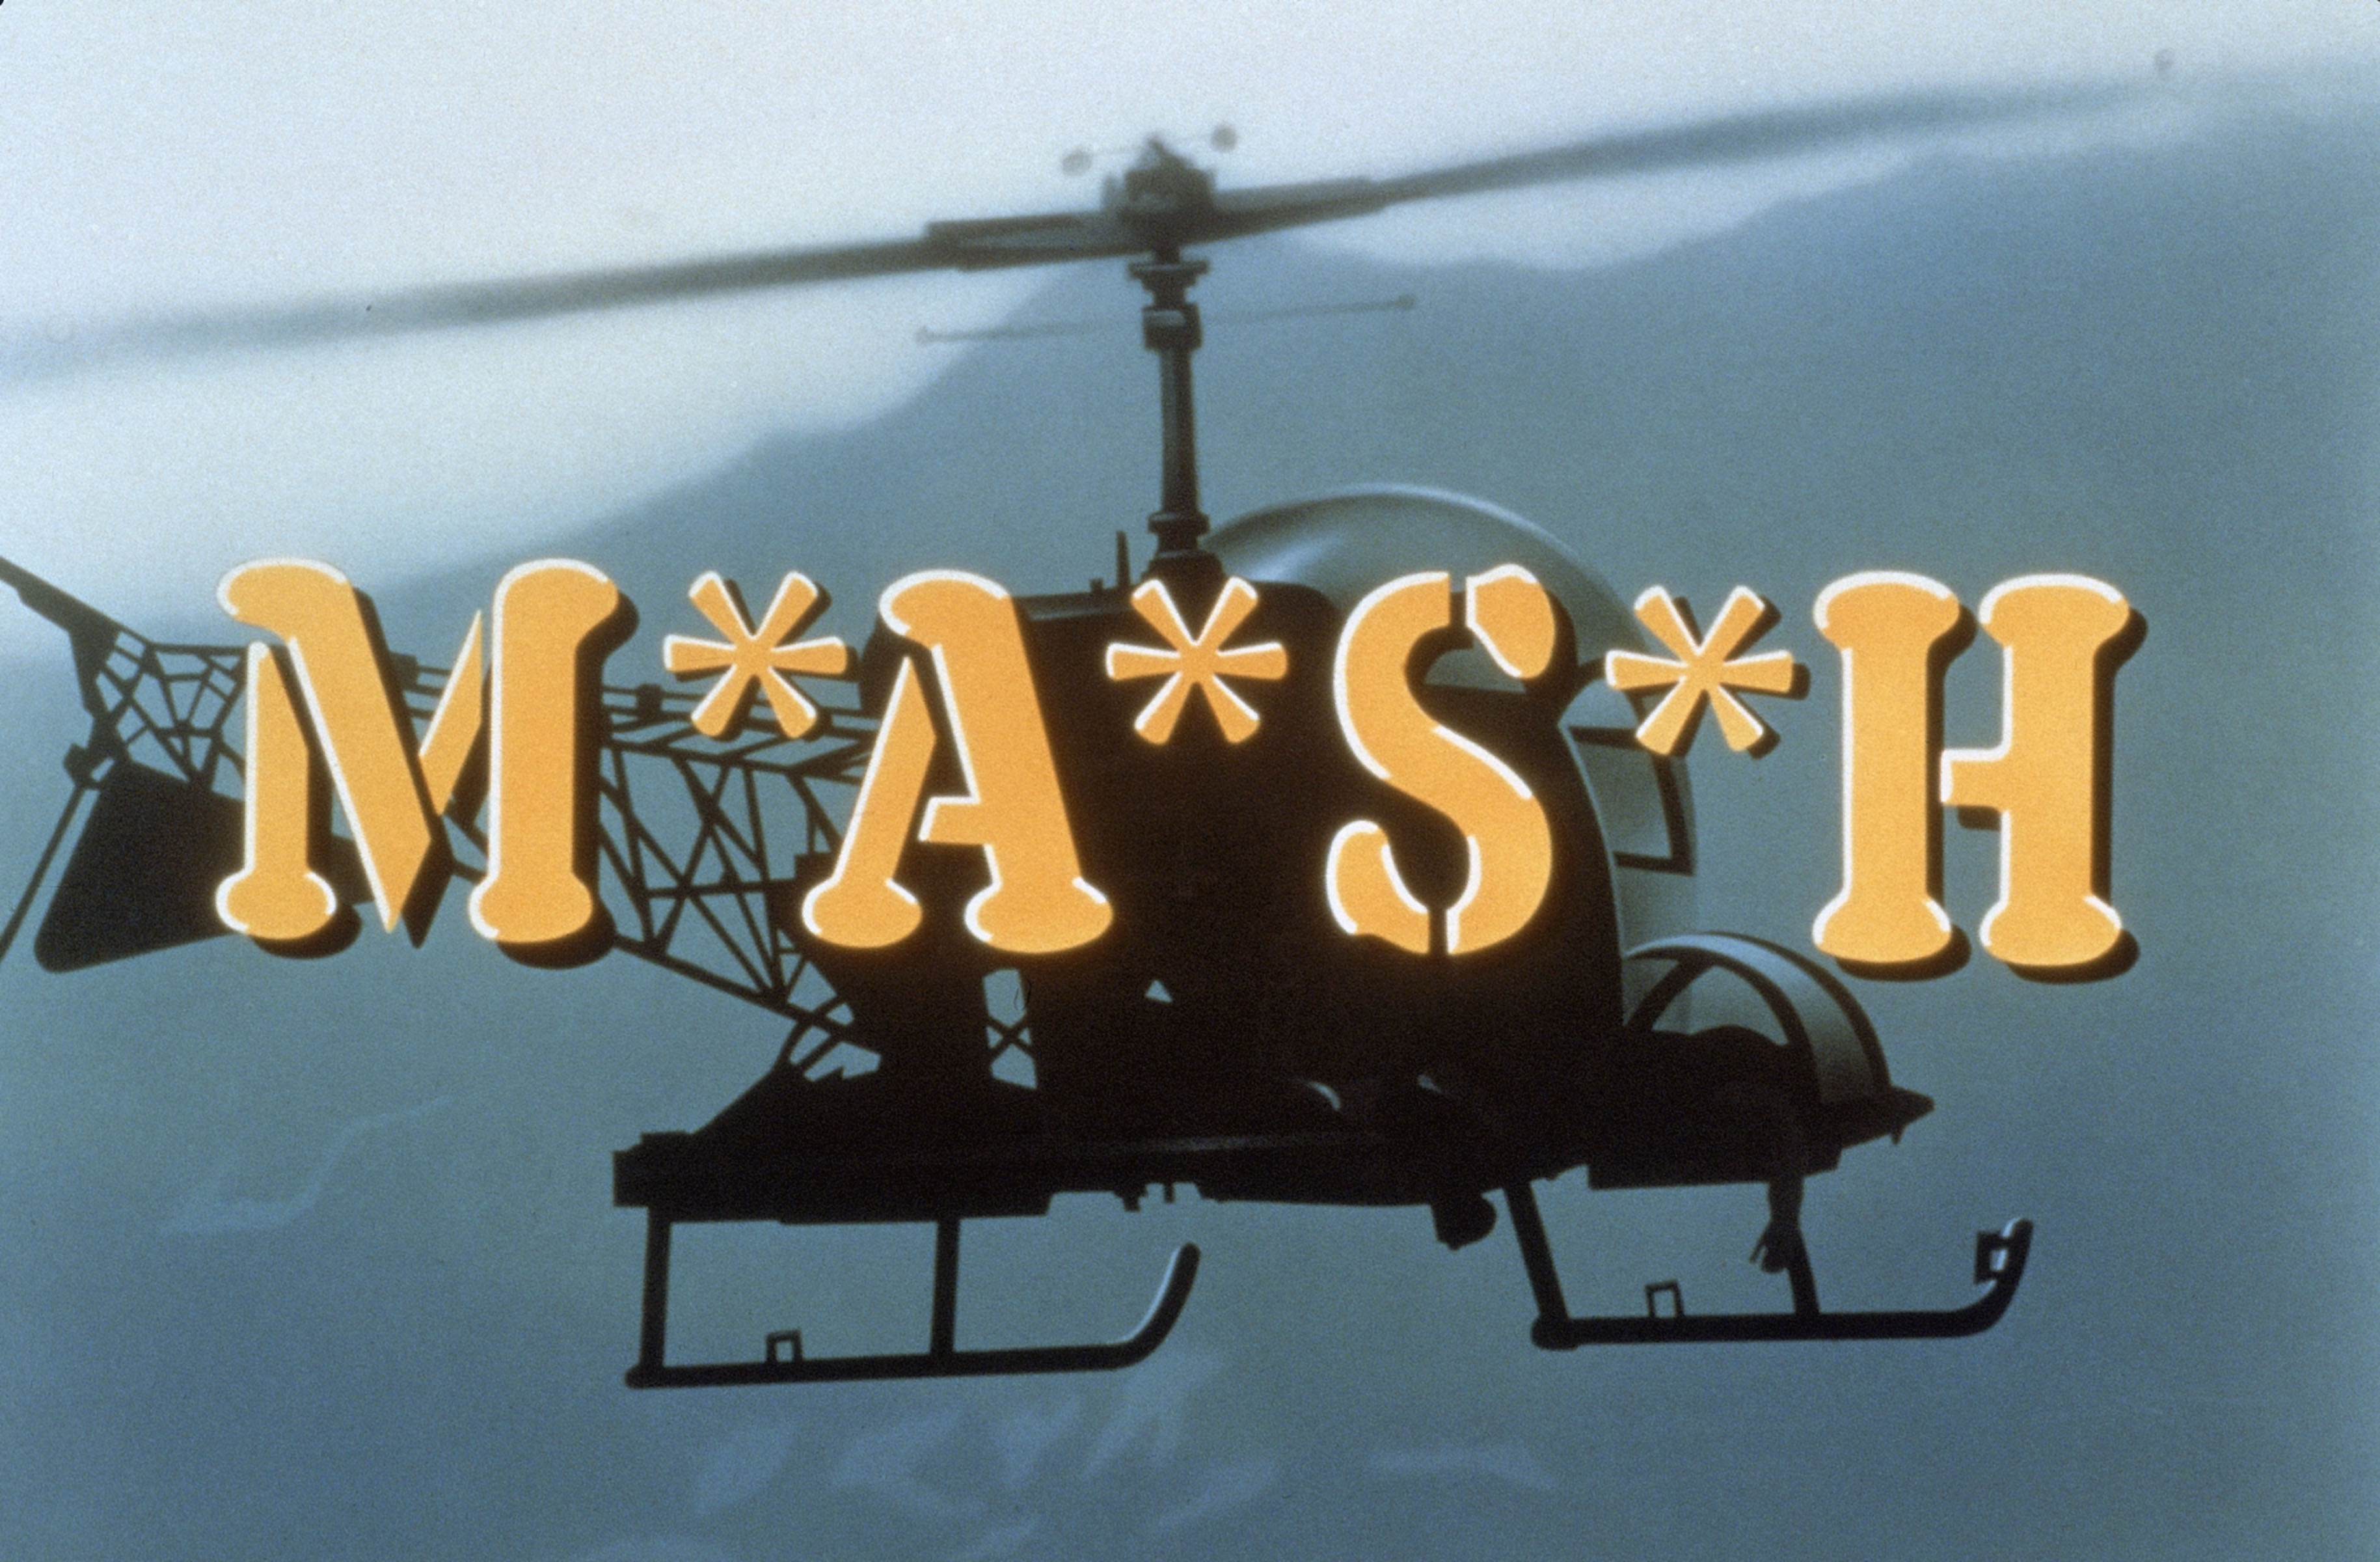 HQ M*a*s*h Wallpapers | File 1027.85Kb